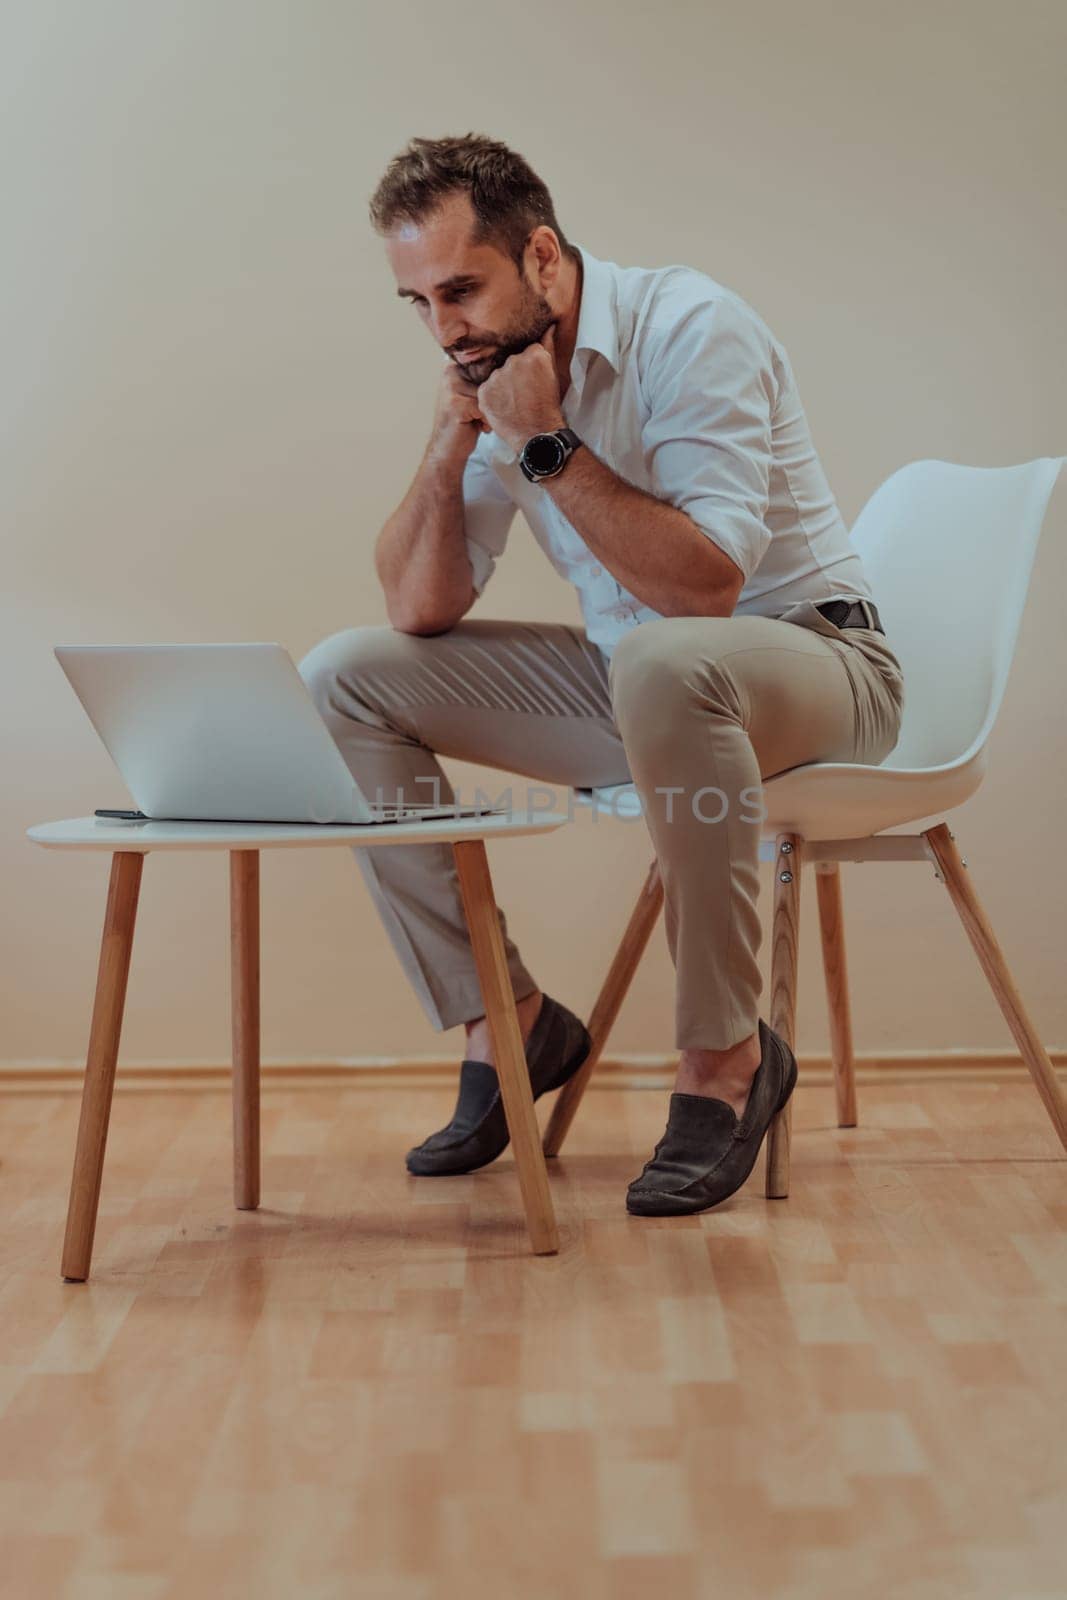 A confident businessman sitting and using laptop with a determined expression, while a beige background enhances the professional atmosphere, showcasing his productivity and expertise